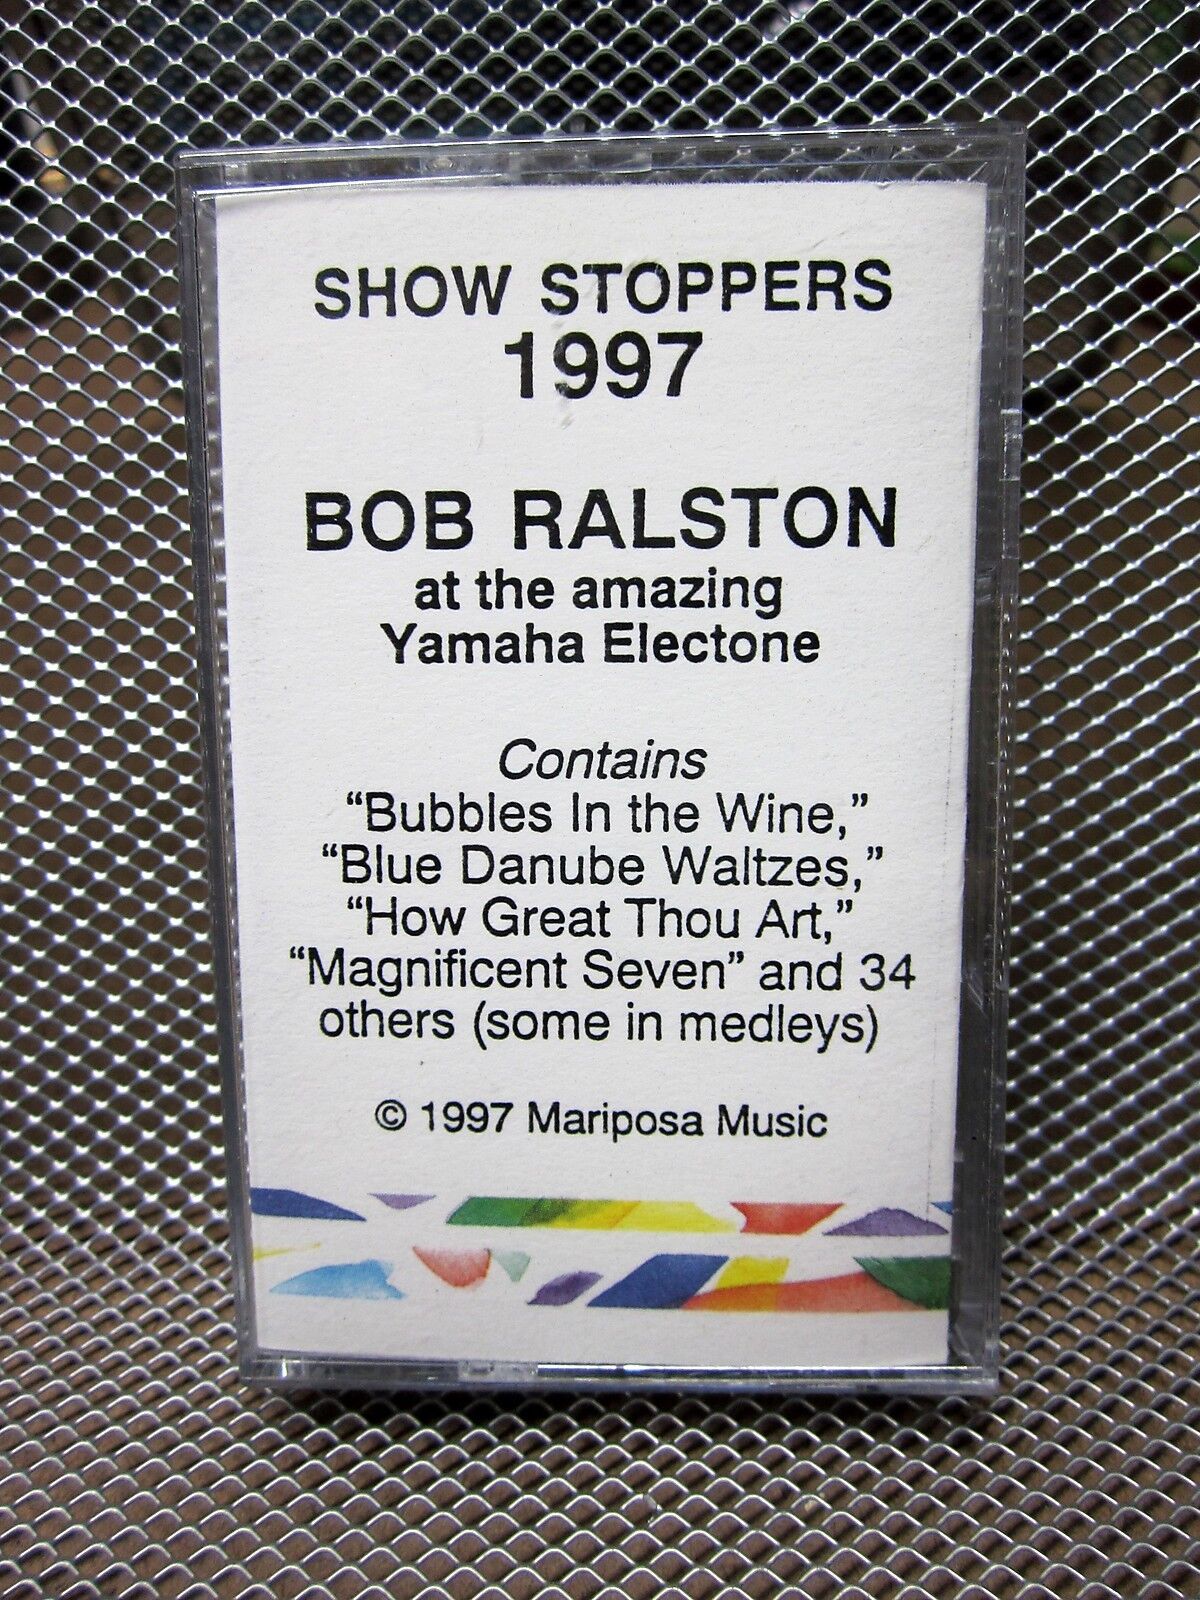 BOB RALSTON cassette tape 1997 Showstoppers Yamaha Electone Lawrence Welk 